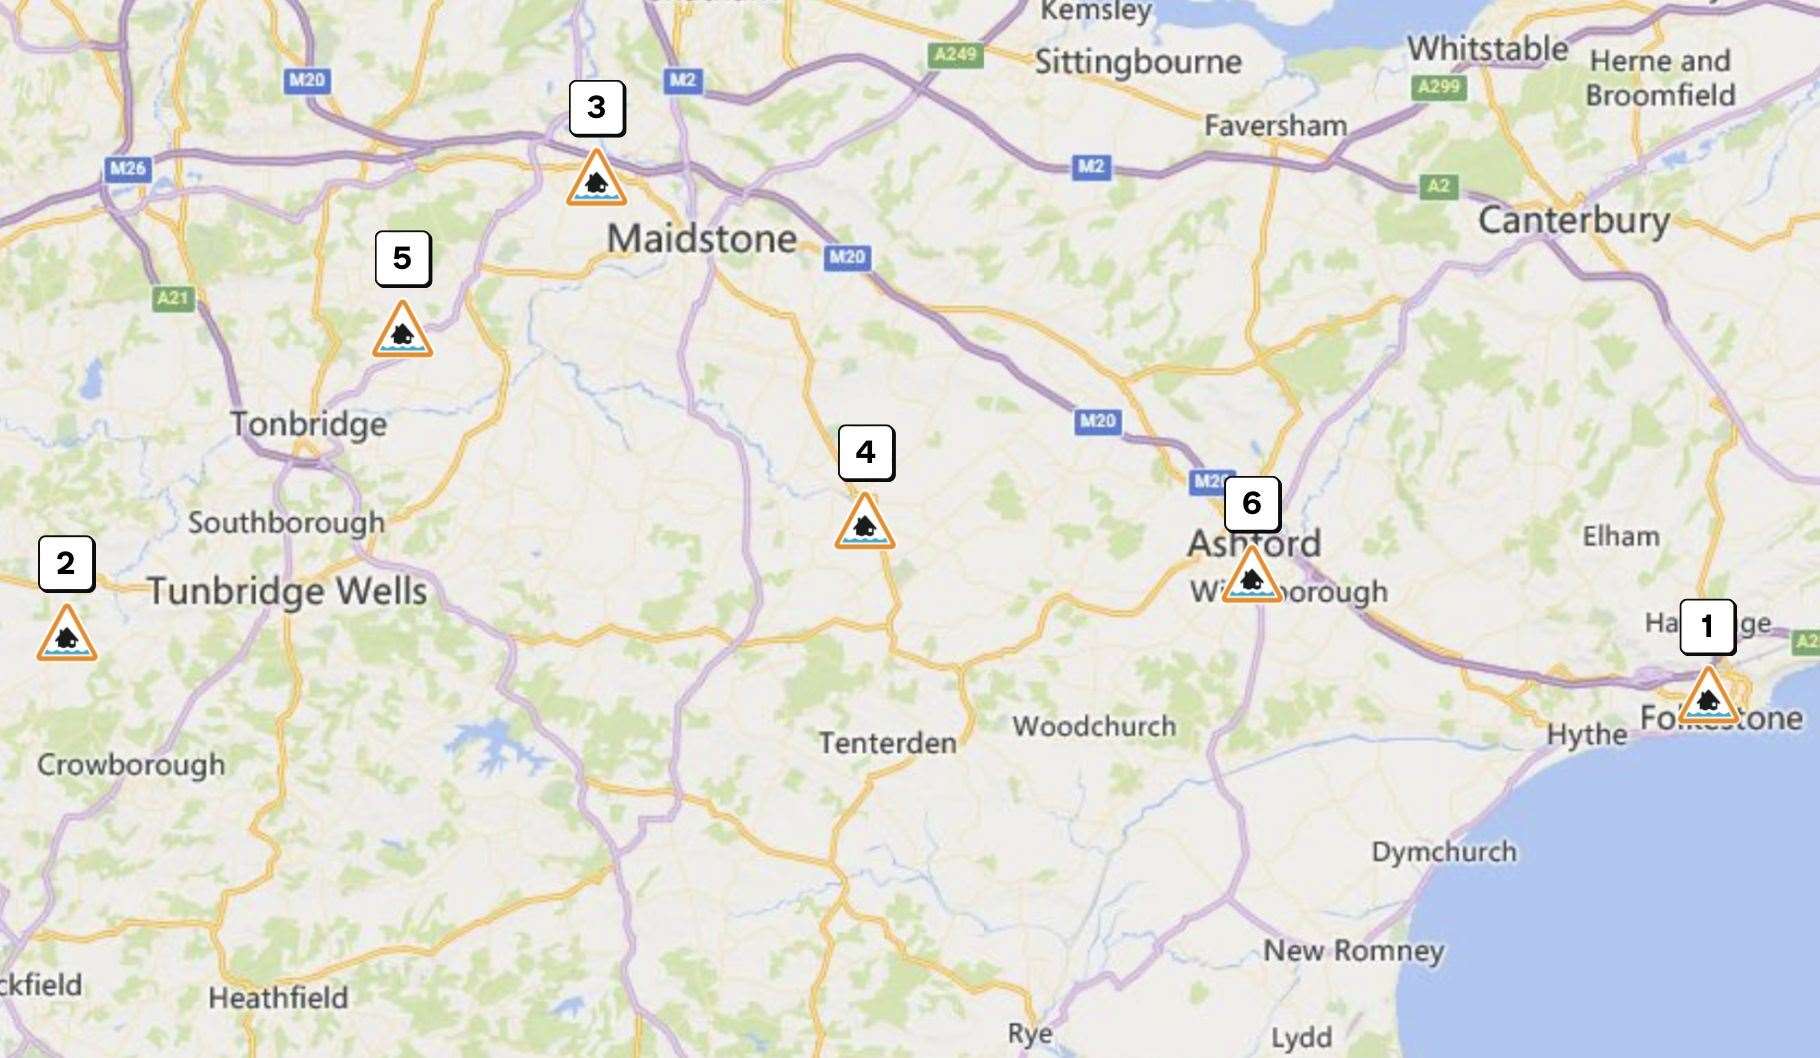 The Environment Agency has issued food alerts across Kent. Image: Environment Agency